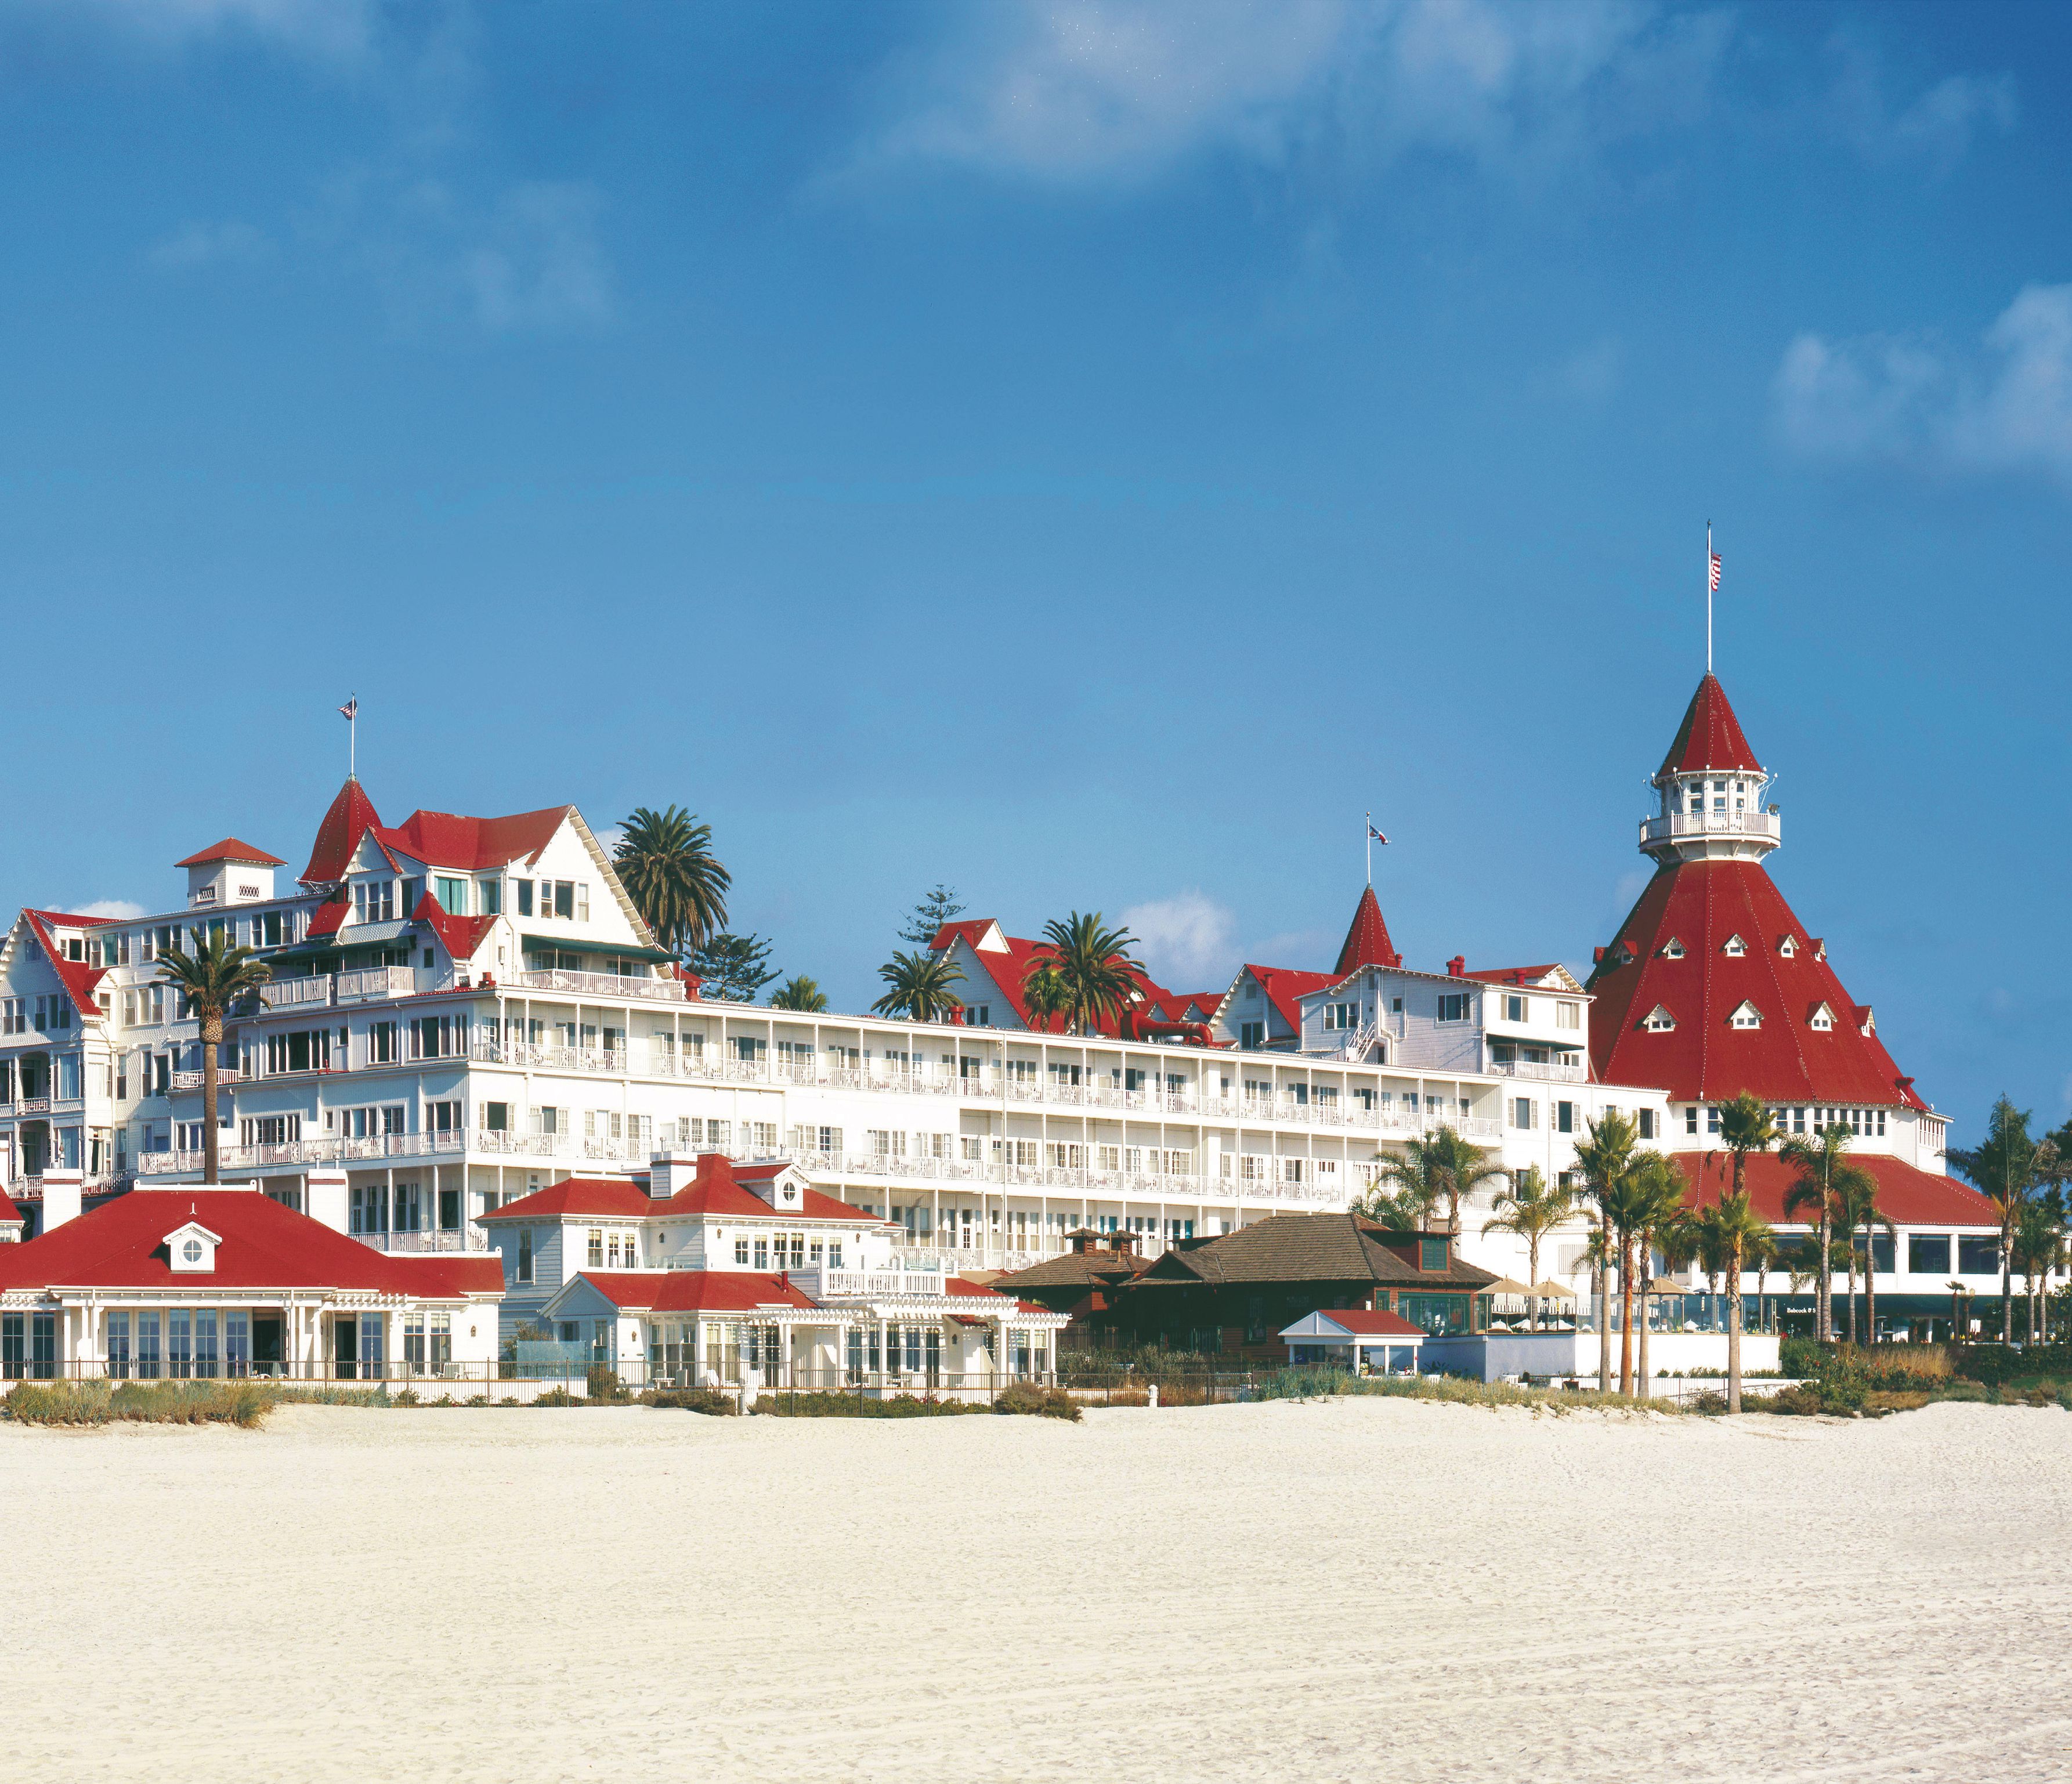 Image of Exterior View from Beach, Hotel del Coronado in Coronado, California, 1888, Member of Historic Hotels of America, Special Offers, Discounted Rates, Families, Romantic Escape, Honeymoons, Anniversaries, Reunions